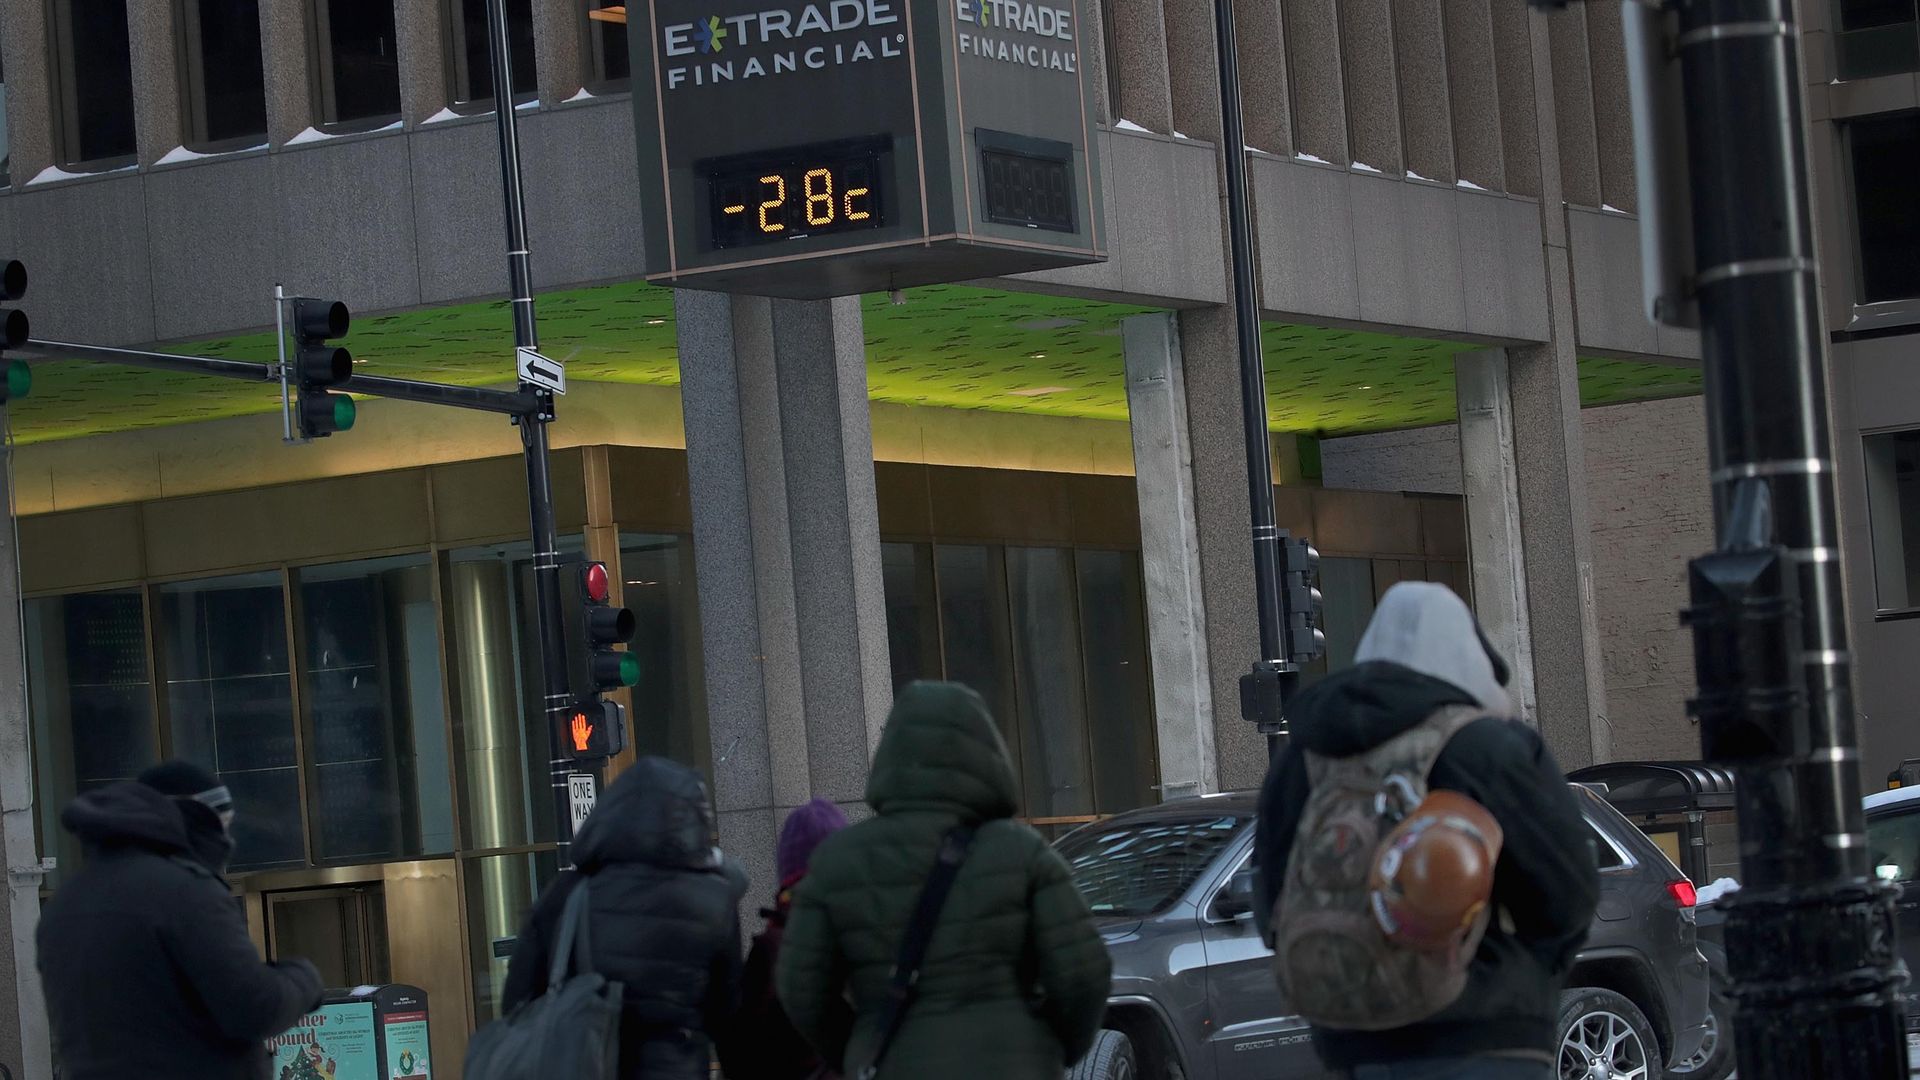 Etrade sign that shows the temperature as minus 21 degrees 